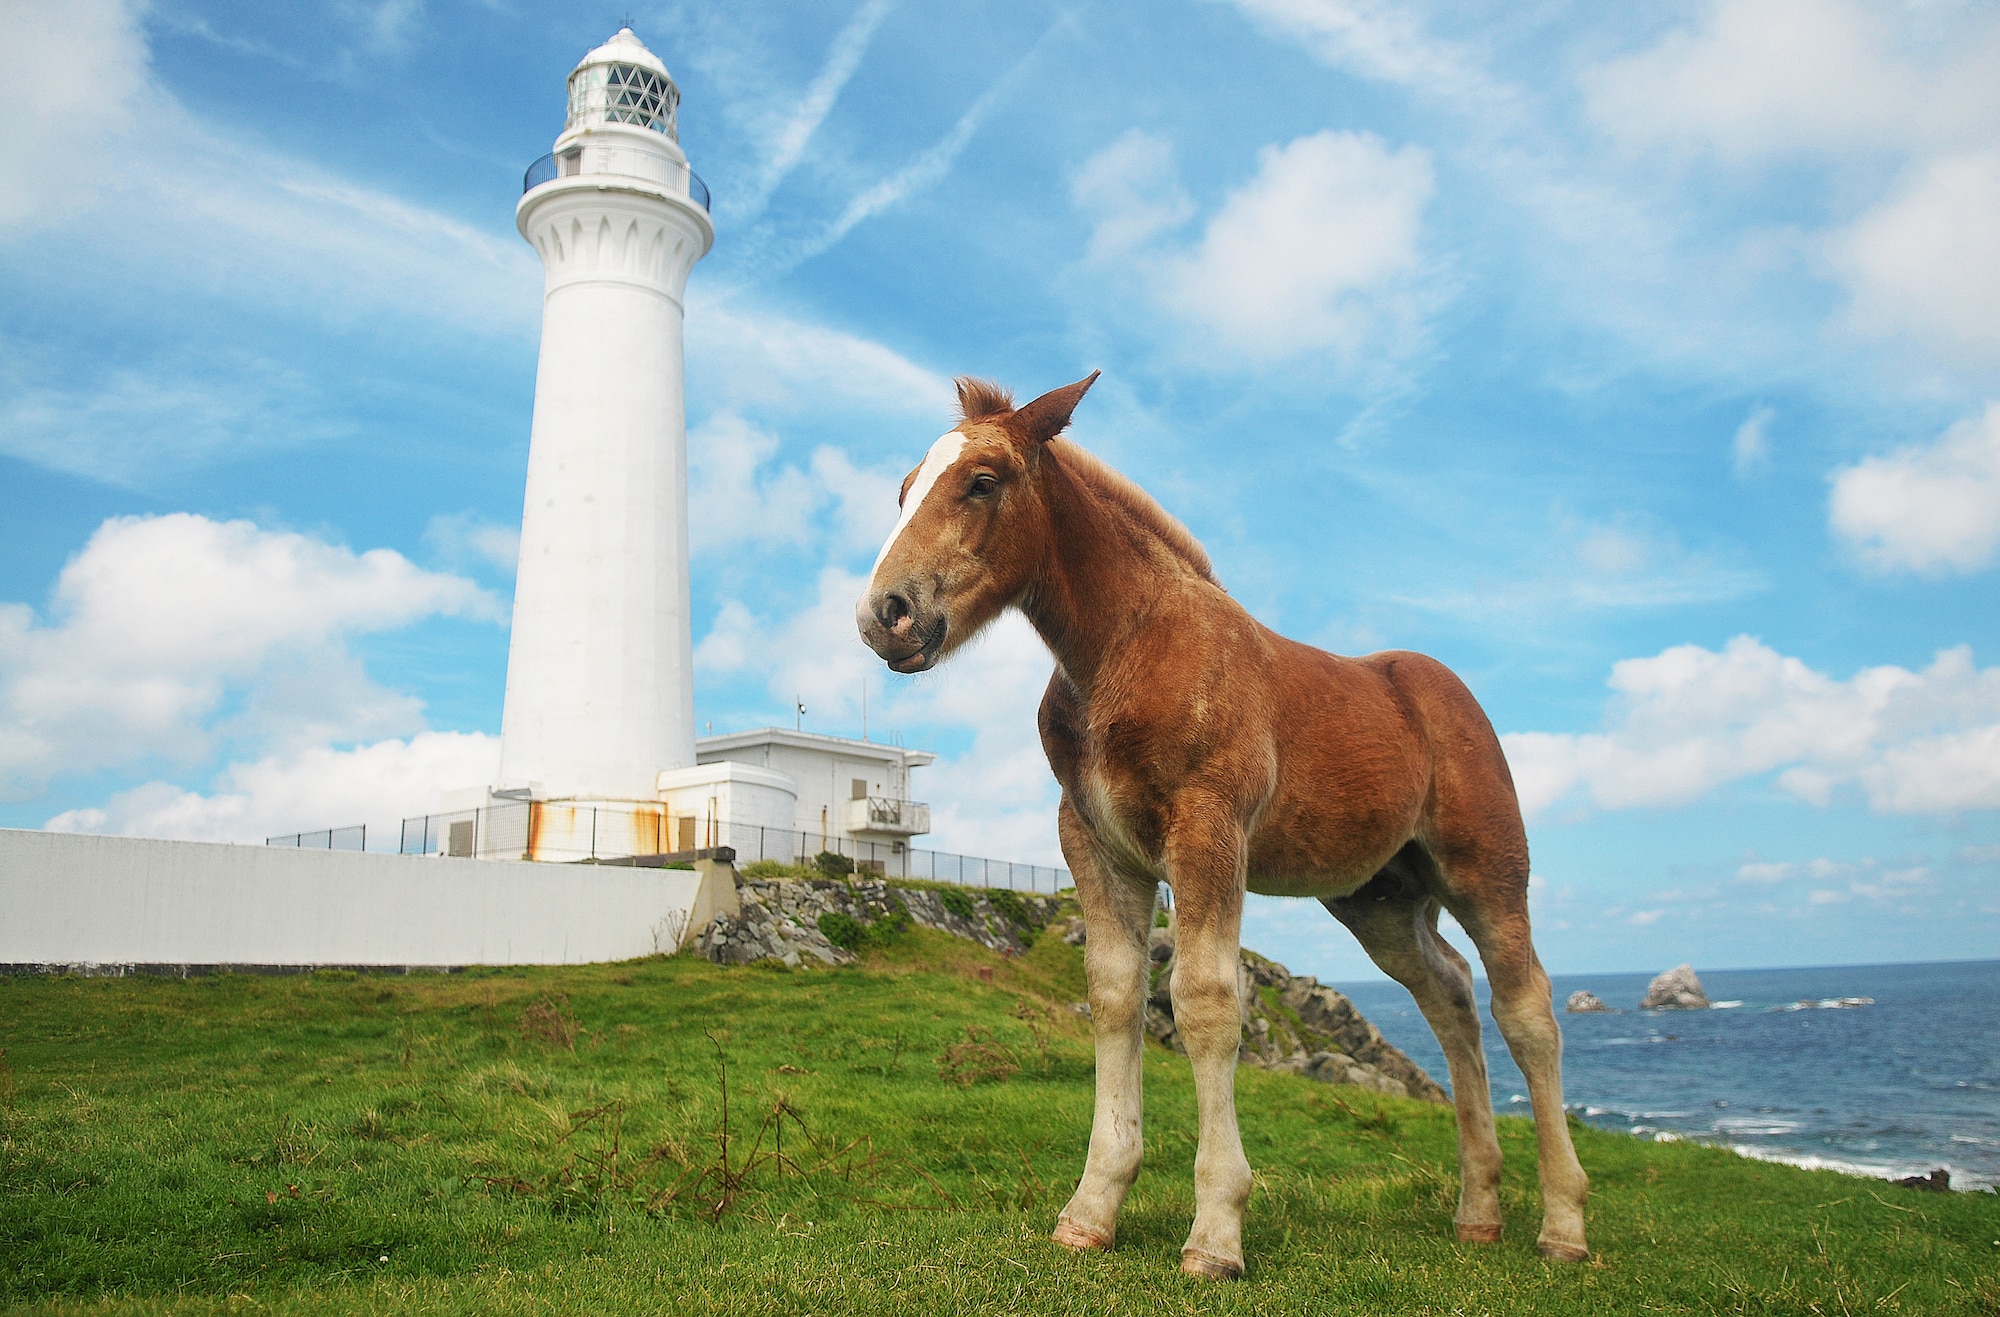 A wild horse grazes near the lighthouse grounds at Cape Shiriyazaki, Higashidori, Japan, Aug. 31, 2014. From 9 a.m. to 5 p.m., horses are brought from a nearby pasture owned by a local family and are allowed to roam the lighthouse grounds and interact with tourists, allowing ample time to pet and take photos. (U.S. Air Force photo by Senior Airman Jose Hernandez-Domitilo/Released)